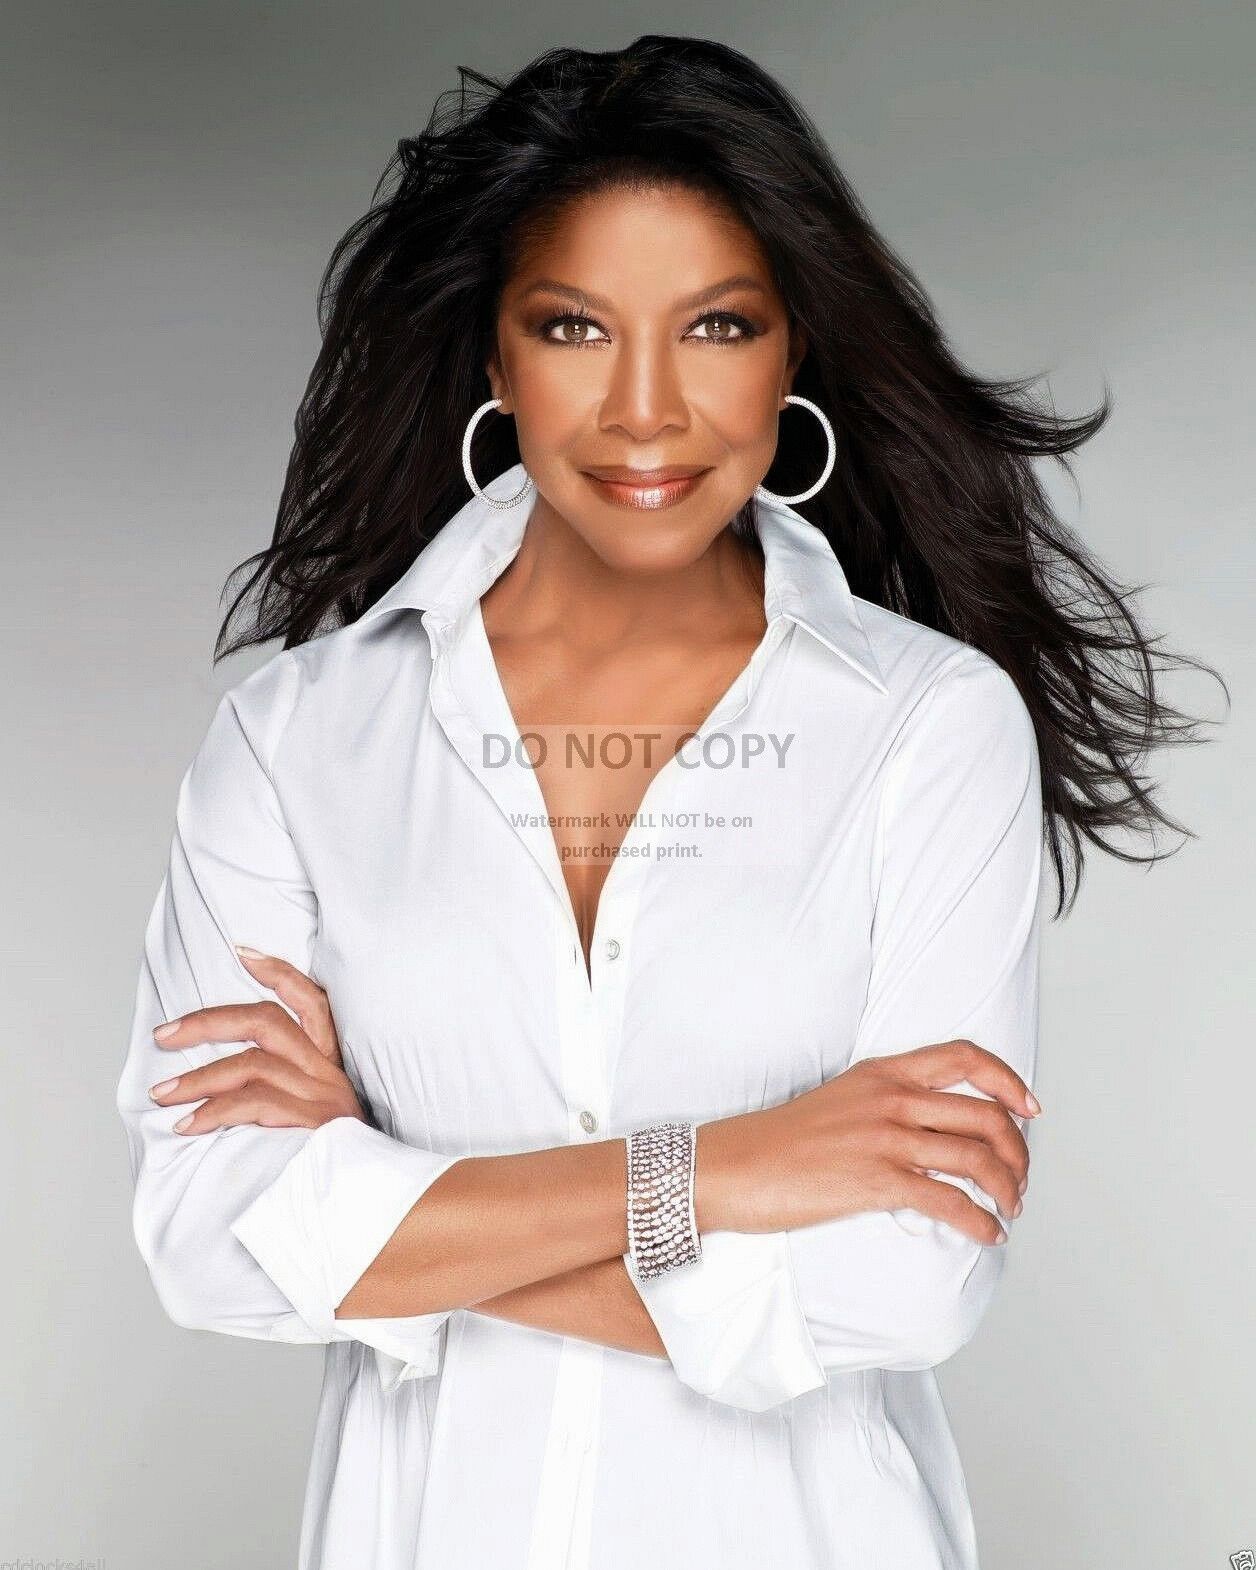 NATALIE COLE MUSIC ARTIST AND ACTRESS - 8X10 PUBLICITY PHOTO (FB-290)